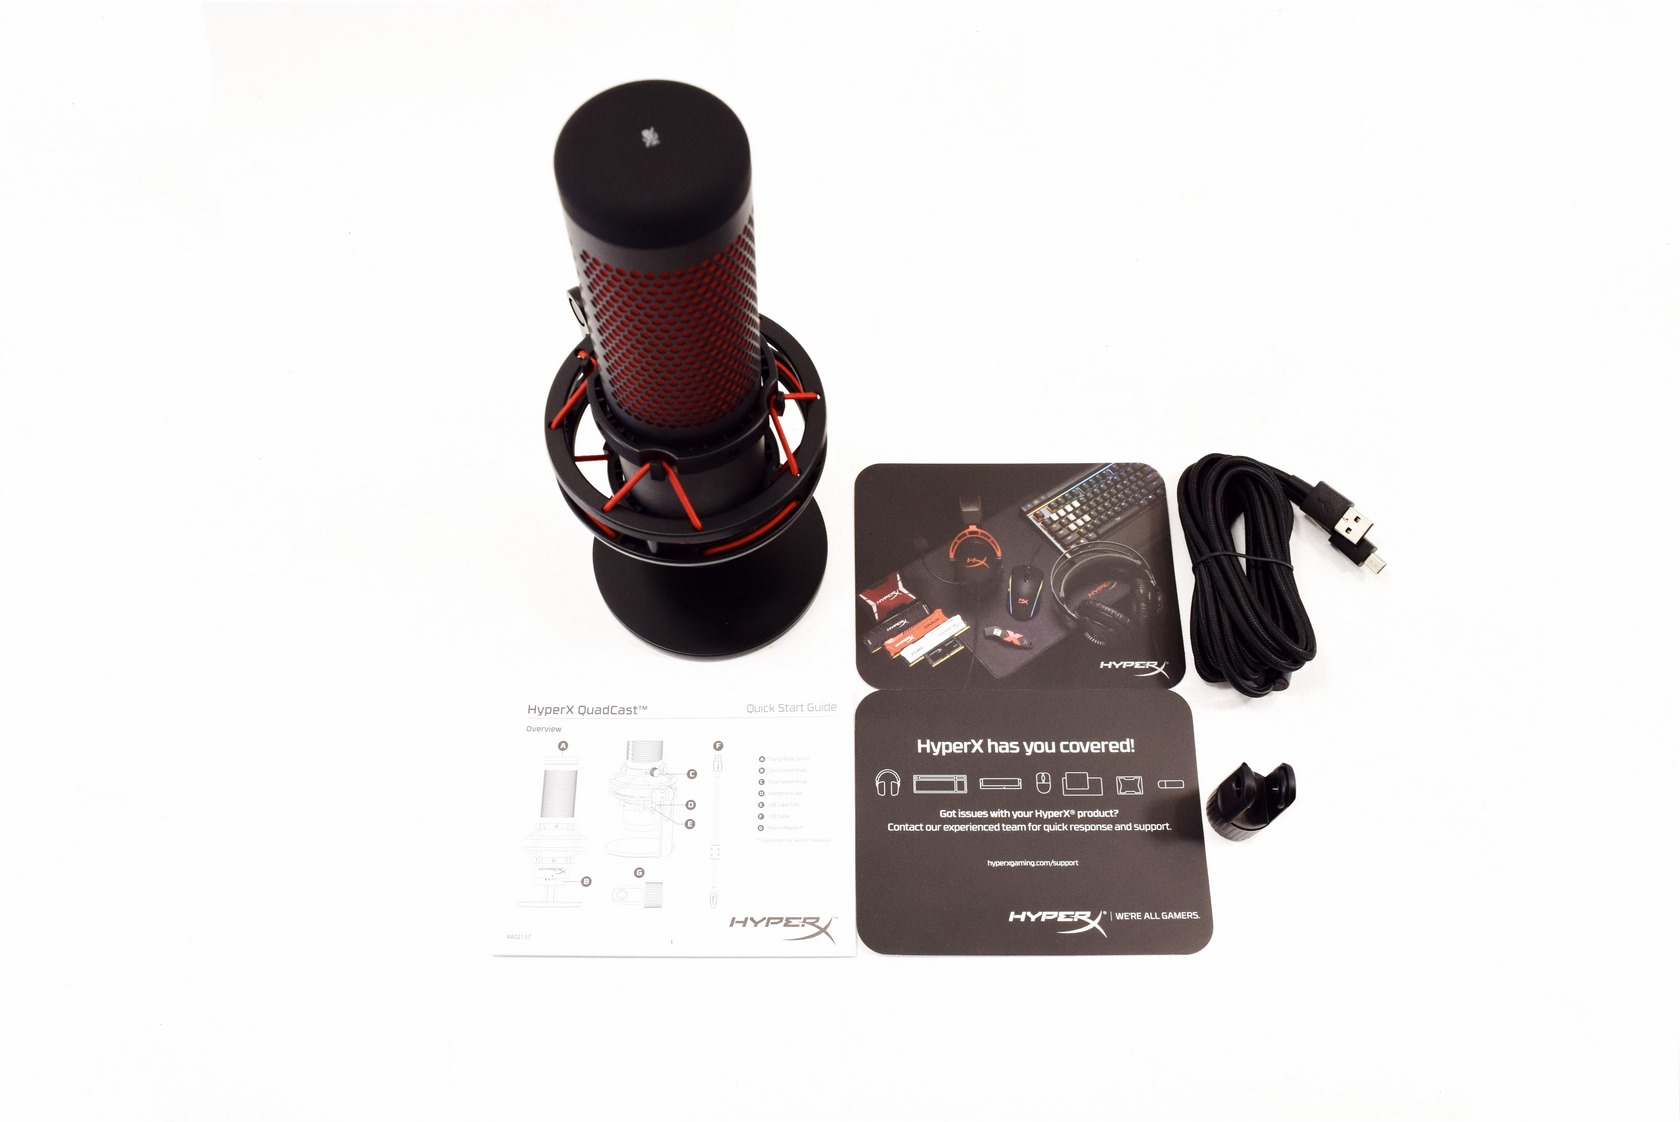 Hyperx Quadcast Standalone Microphone Review